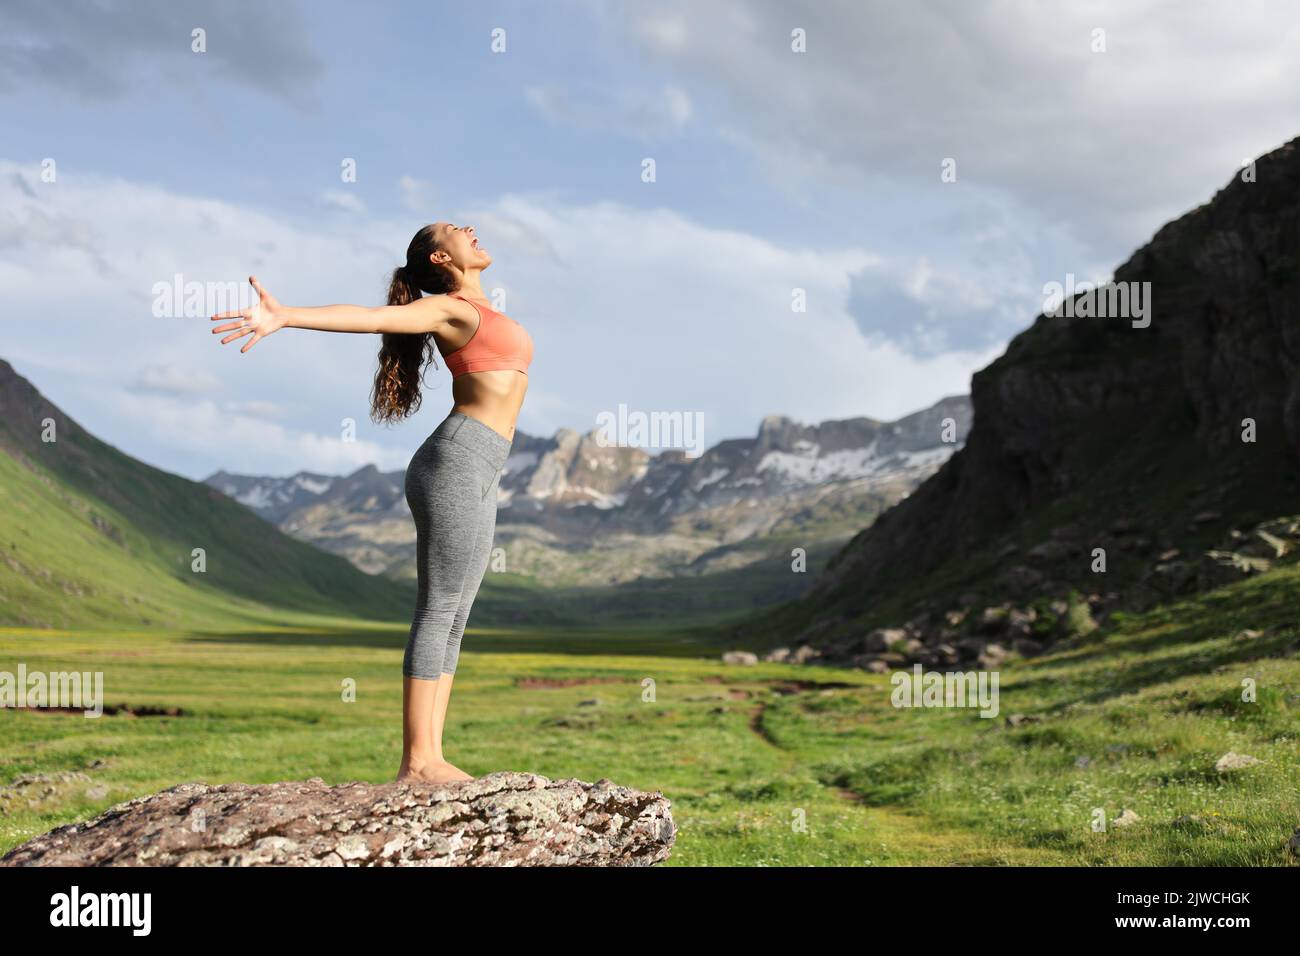 Side view full body portrait of a yogi outstretching arms celebrating in the high mountain Stock Photo